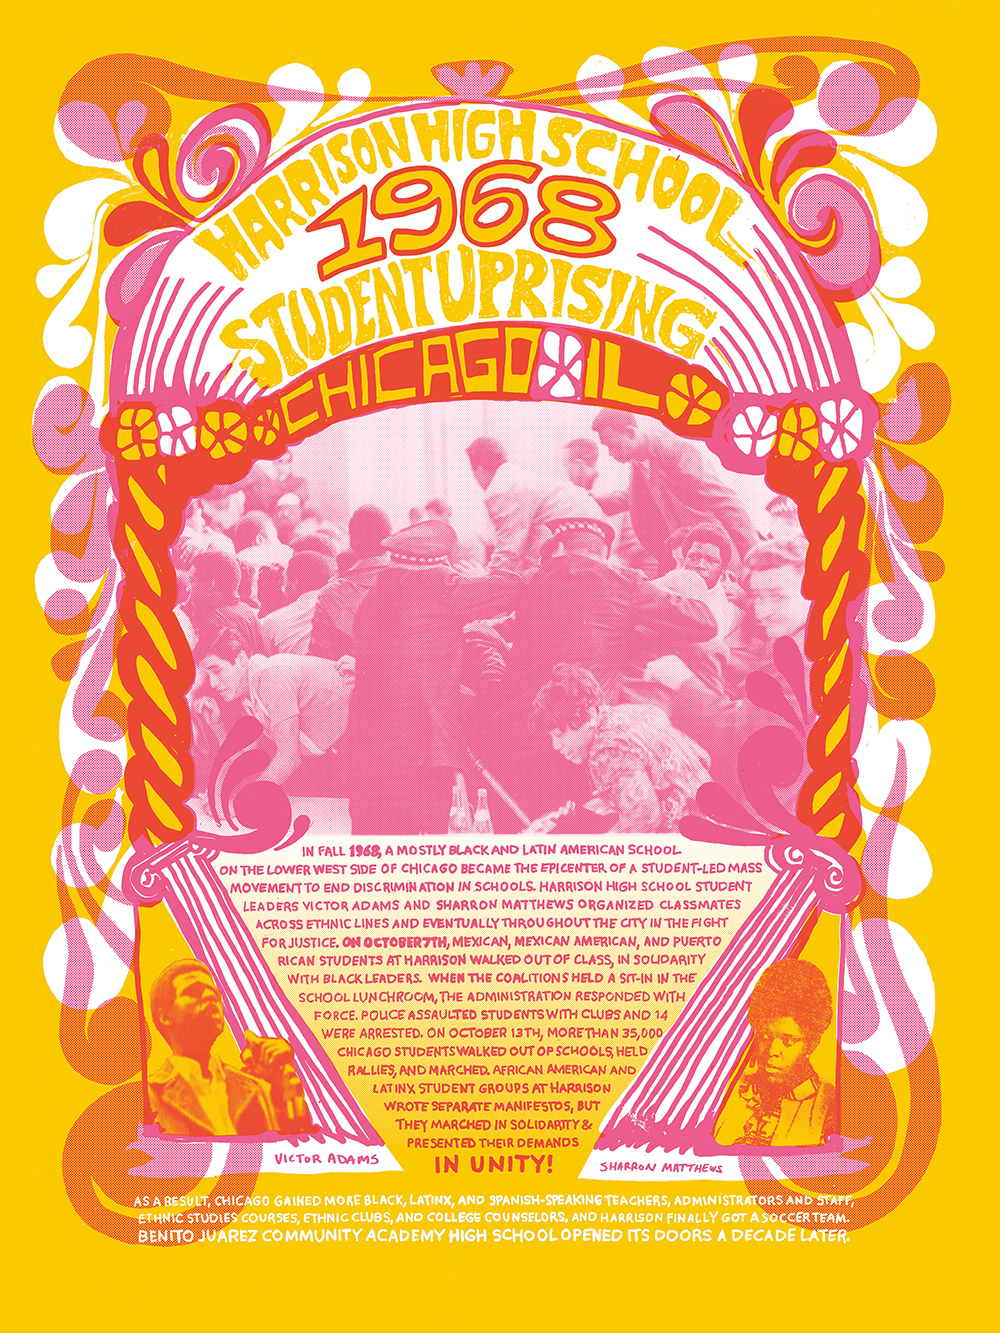 Image: Nicole Marroquin, Harrison High School Student Uprising, 1968, silkscreen on paper, 18x24”, 2017. Set on a yellow-orange background, a color print in red, pink and white ink contains text describing the student uprising, as well as an archival photograph of Chicago police intervening with students. Image courtesy of the artist.